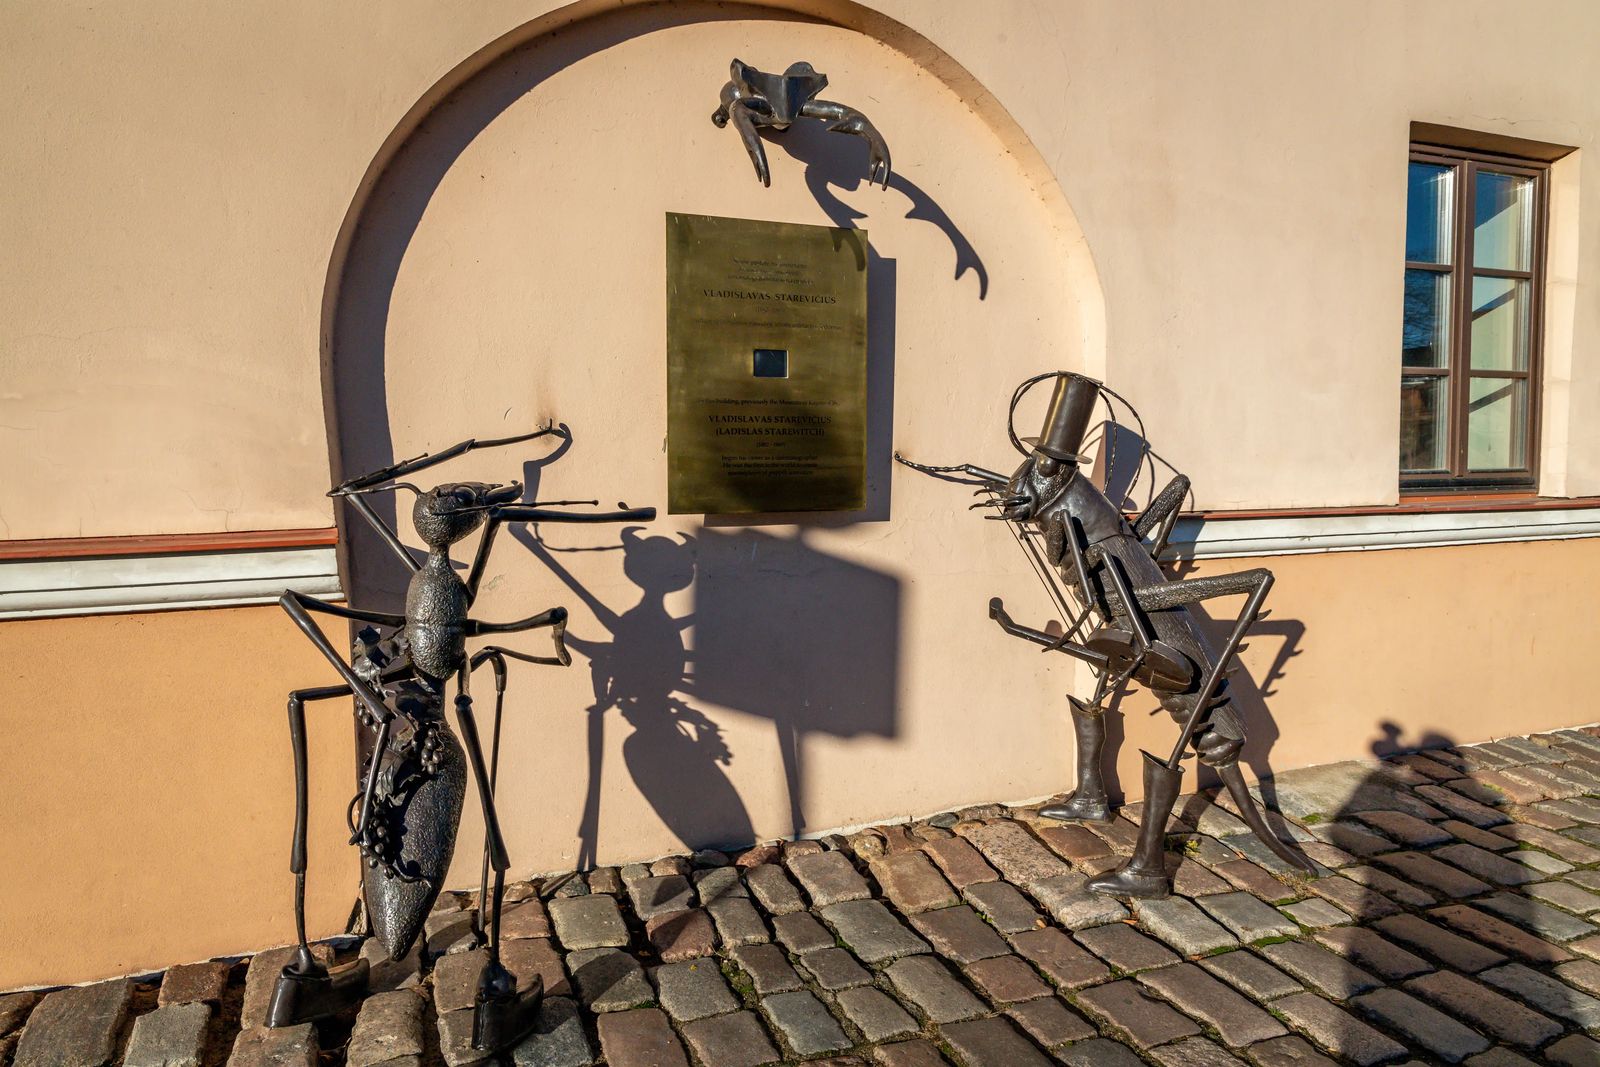 Things to do in Kaunas - metal statues of bugs looking at a placard